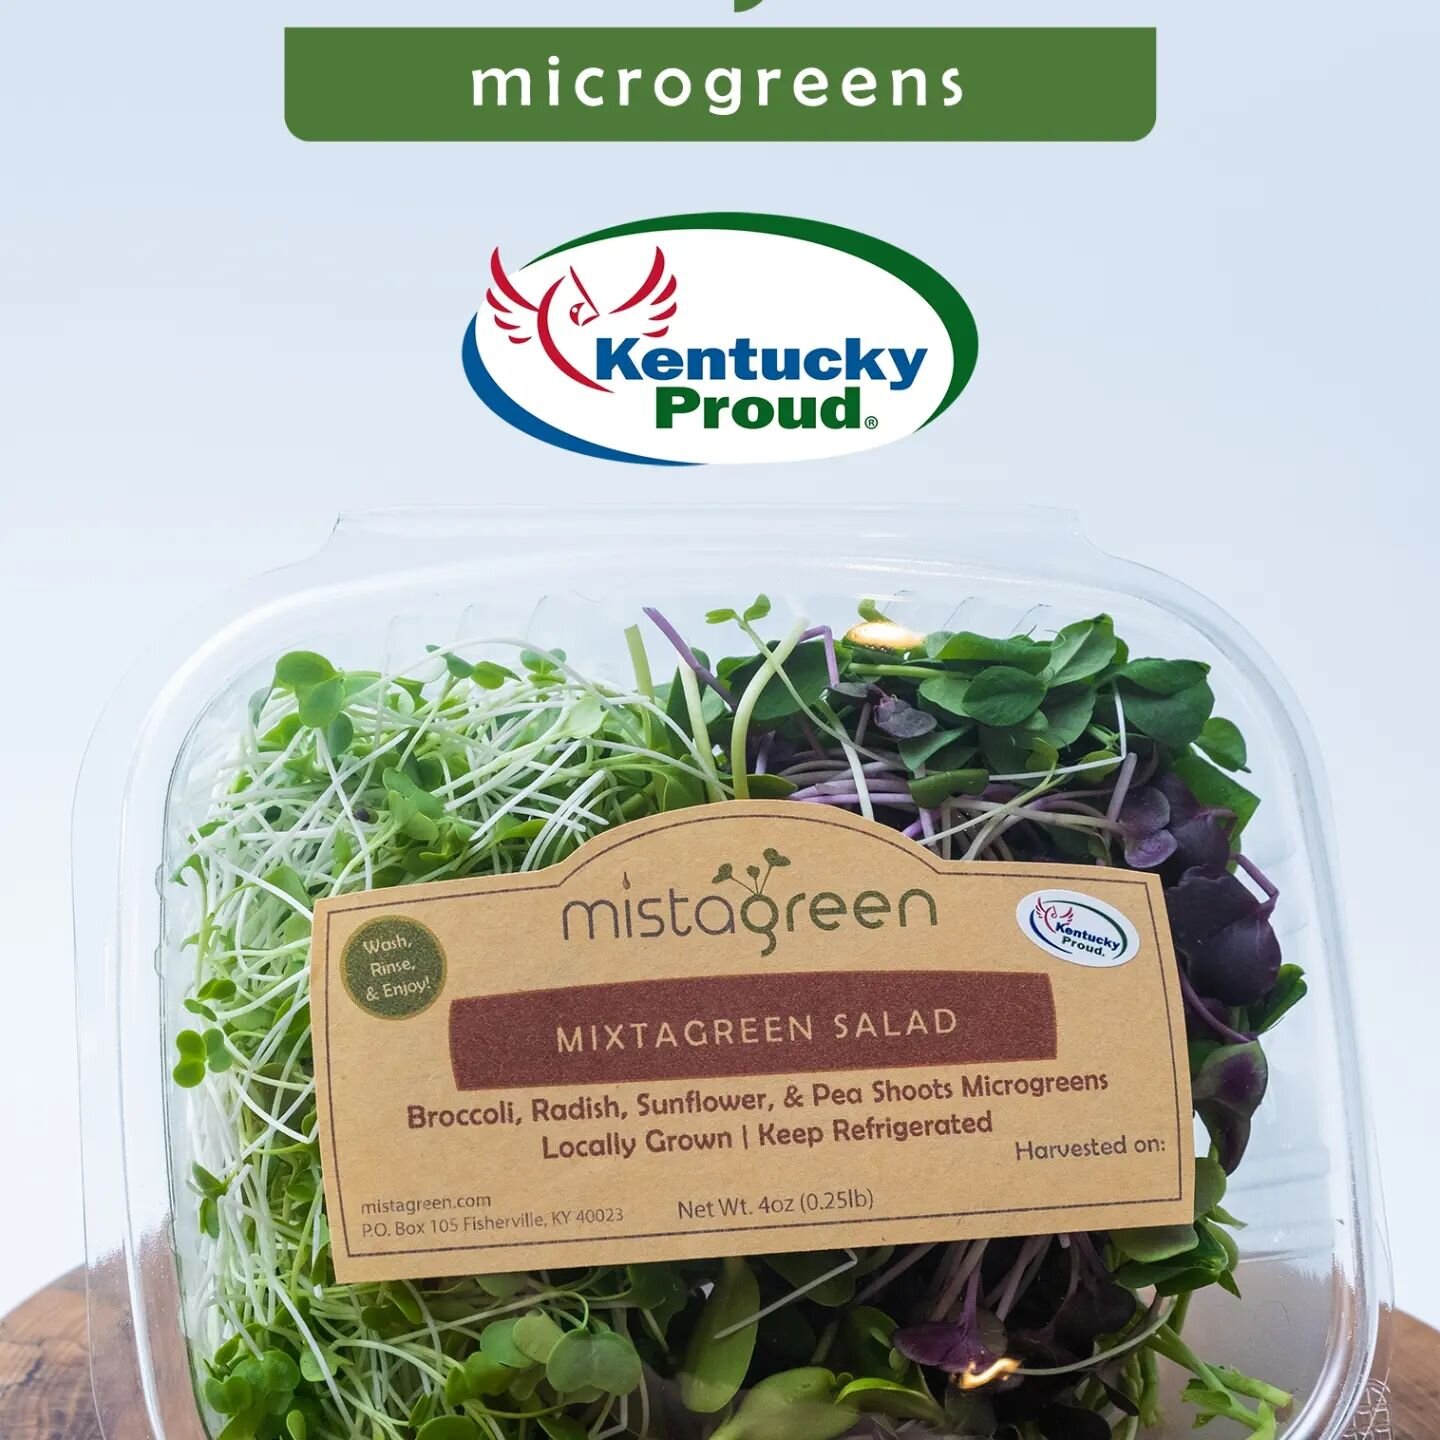 BIG NEWS! We're excited to announce that MistaGreen is now #kentuckyproud ! PLUS, we now have a new #microgreen mix available! This fresh mix includes 4 tasty microgreens including: broccoli, radish, pea shoots, and sunflower microgreens! Come see us